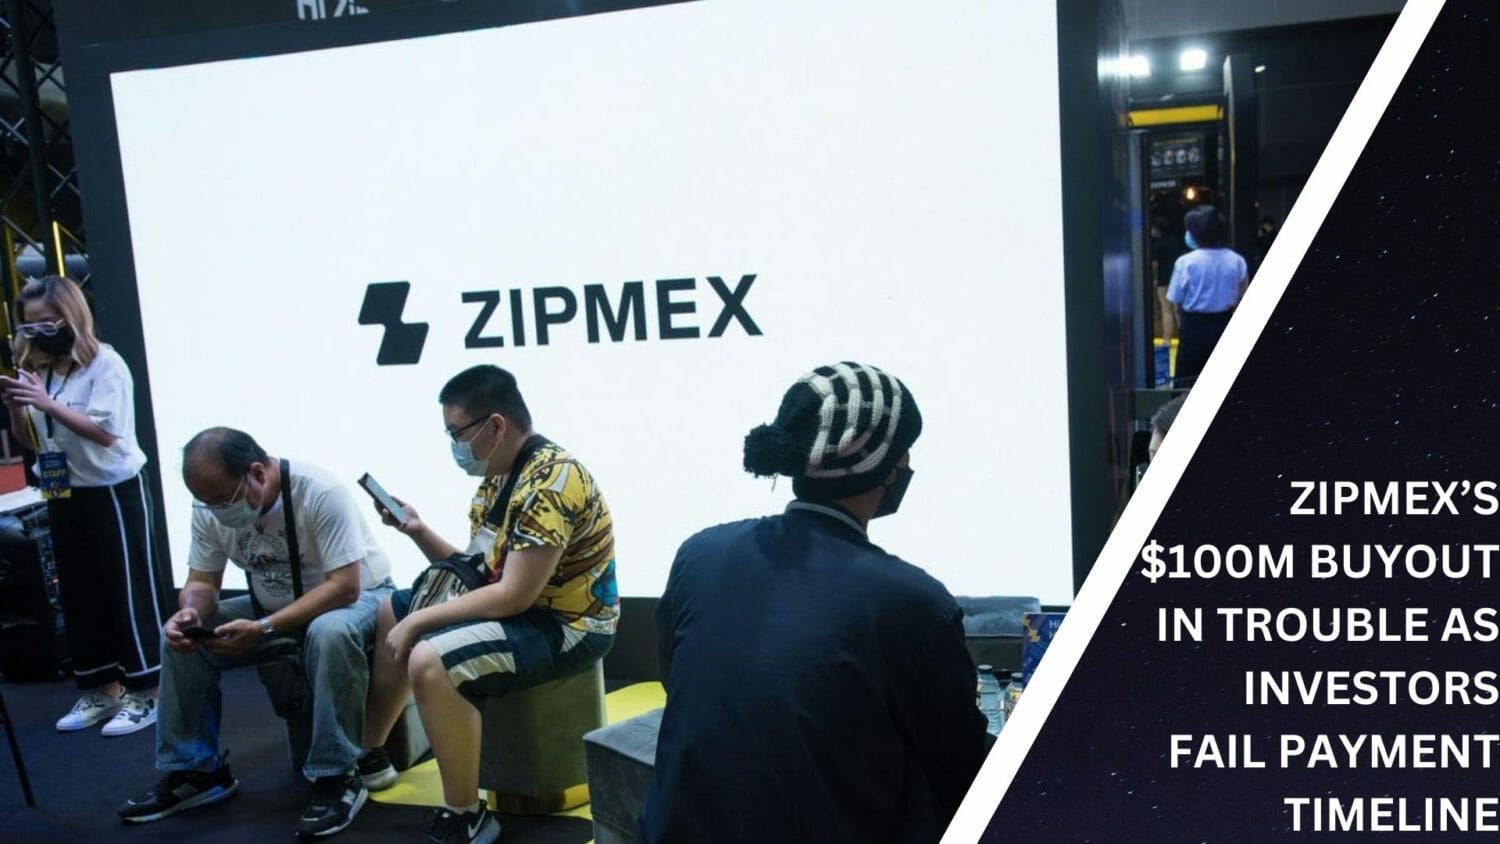 Zipmex’s $100M Buyout In Trouble As Investors Fail Payment Timeline